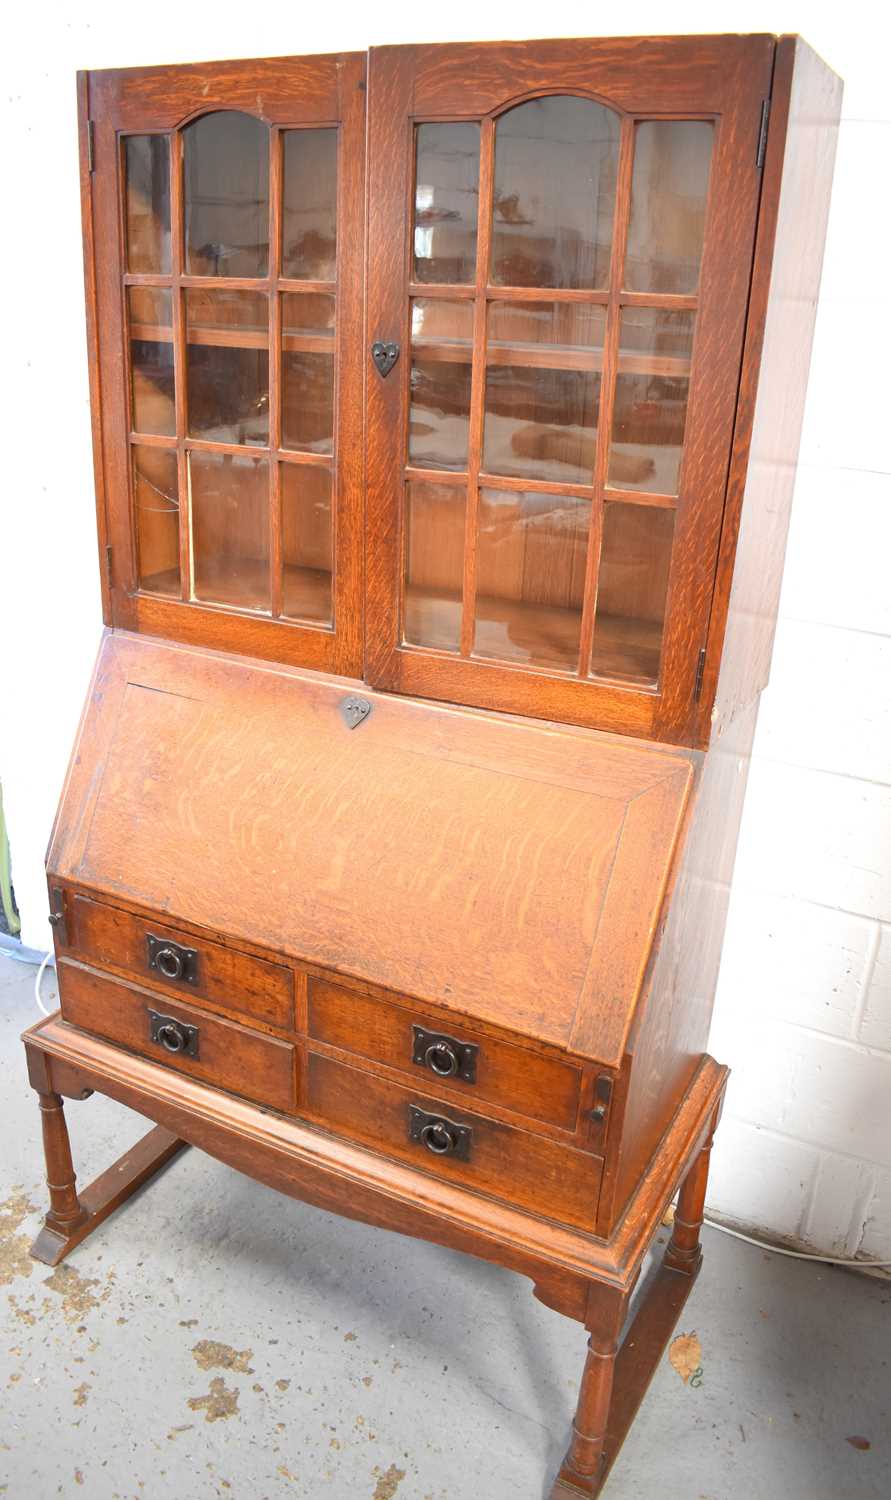 A Heals of London Art Nouveau period bureau bookcase, designed by Ambrose Heal from the Mansfield